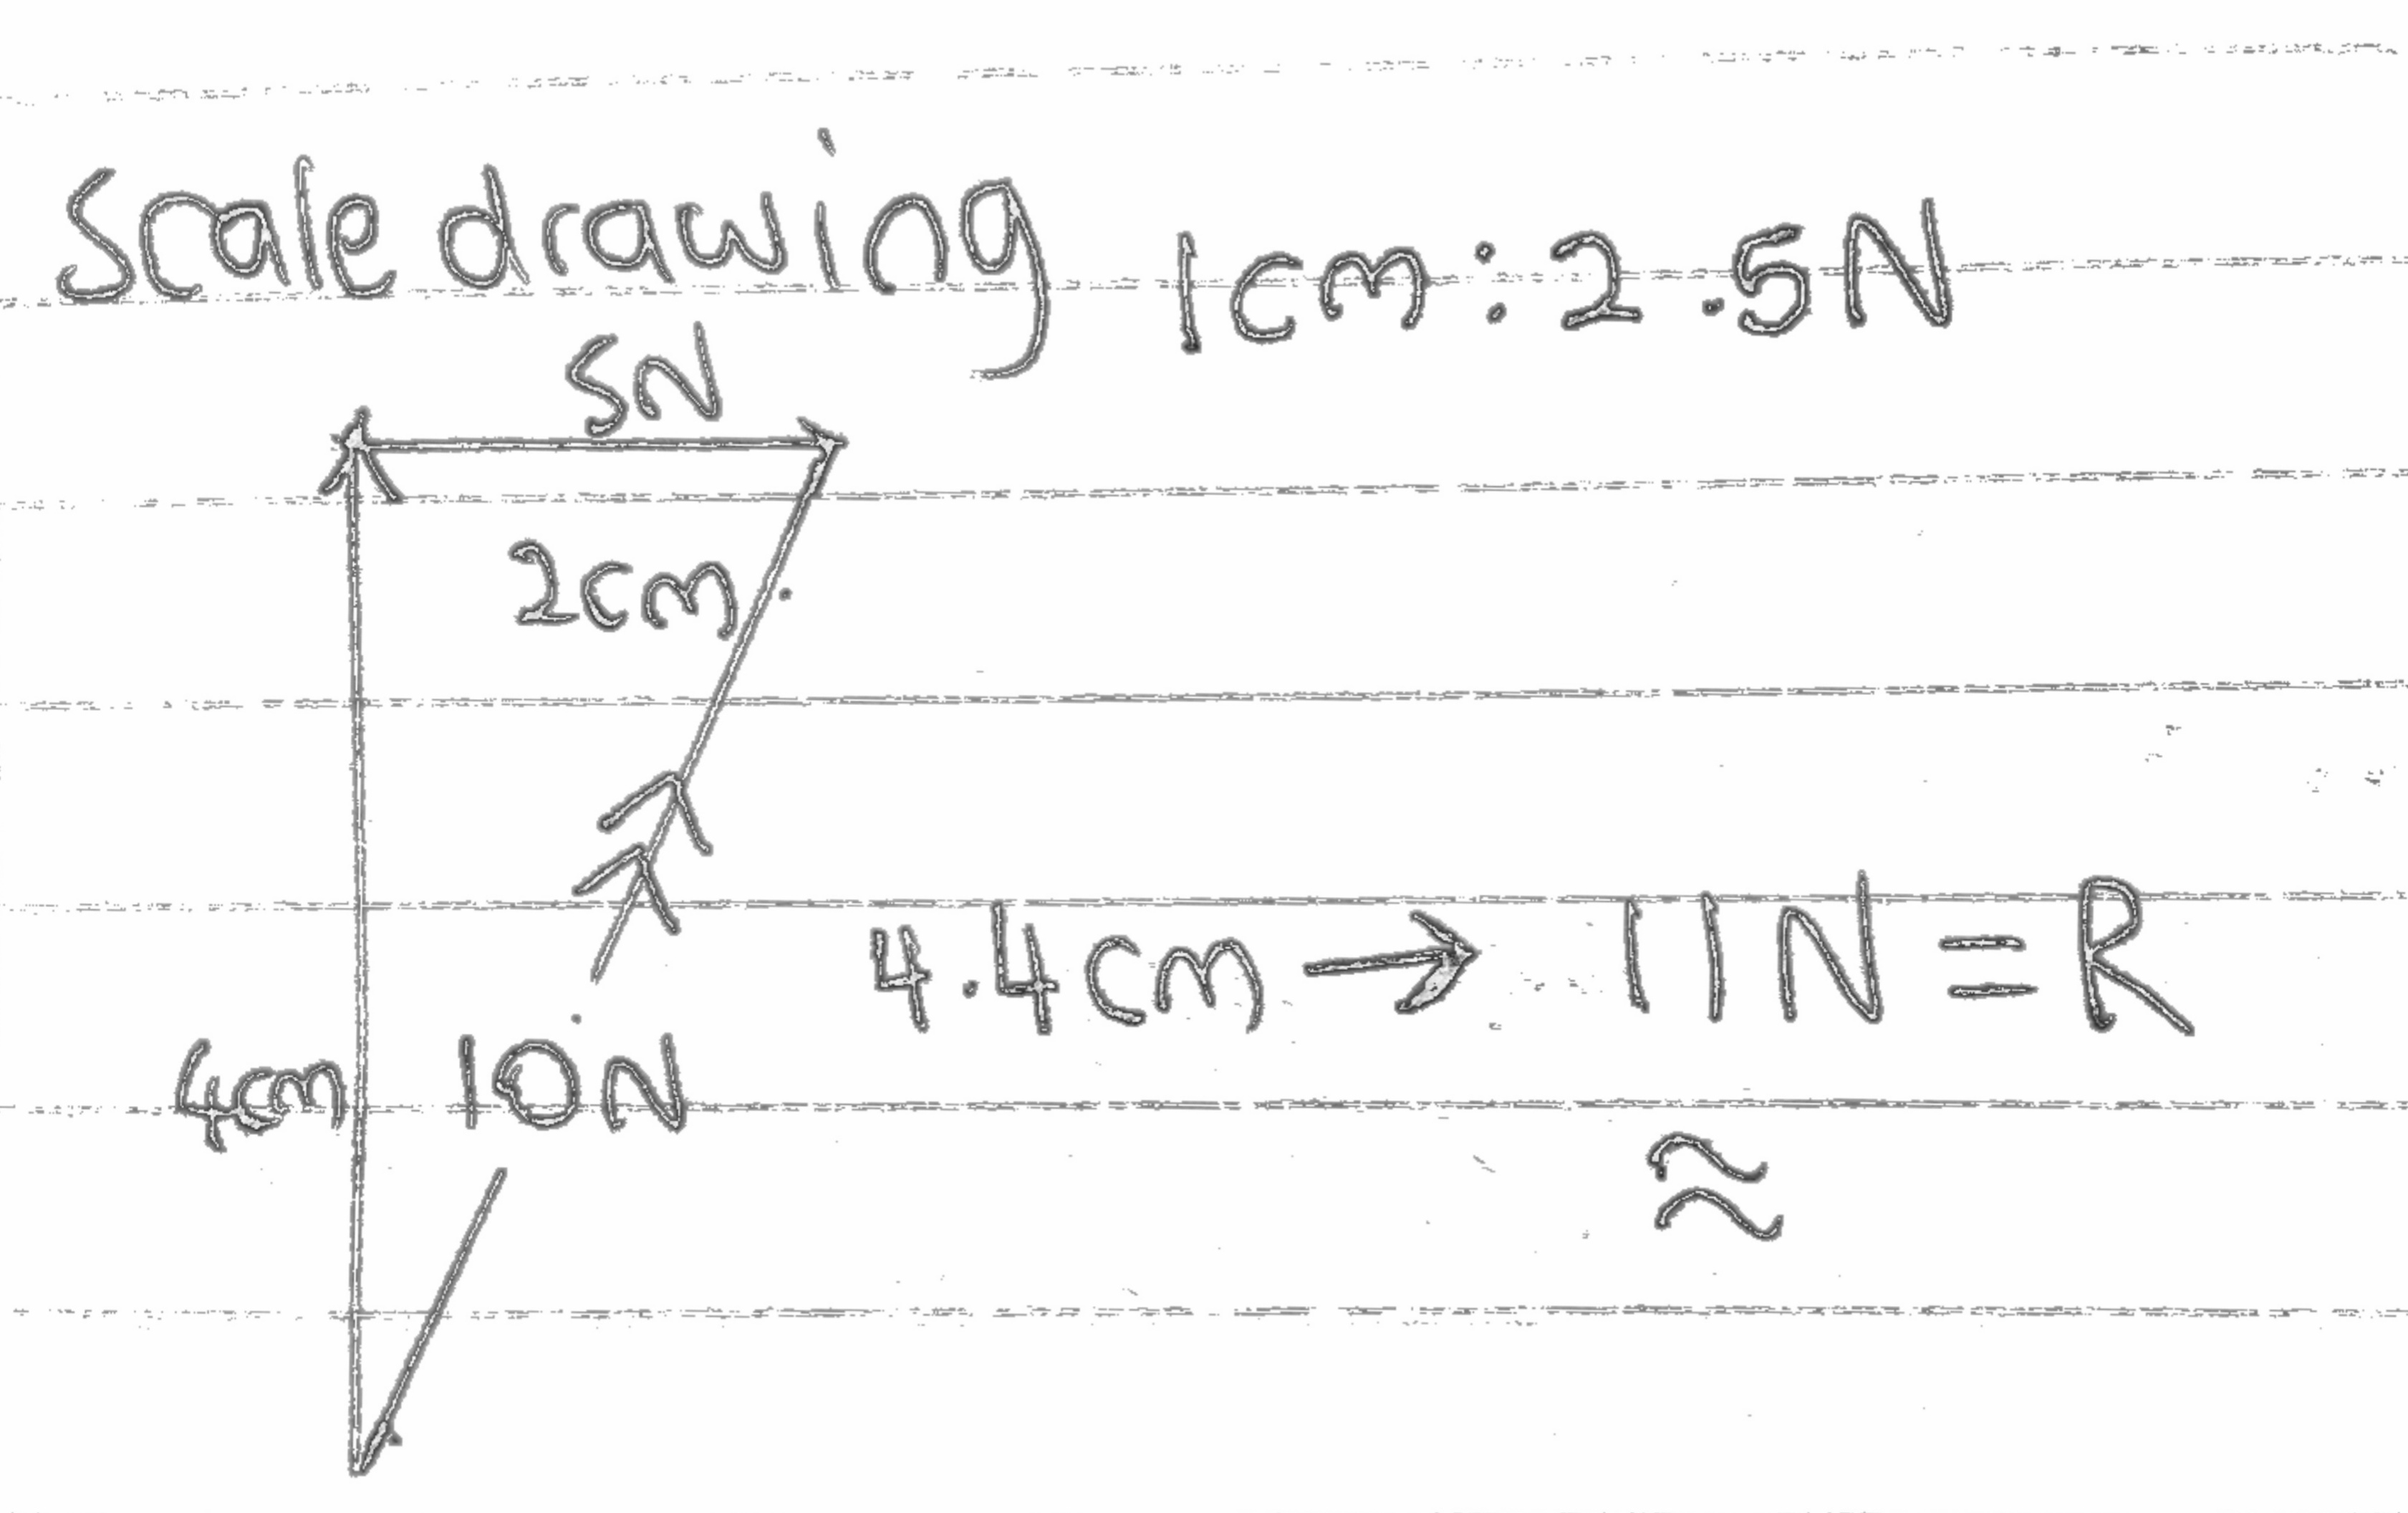 The image shows an example of scale drawing to add vectors up. A scale of 1cm:2.5N is used and it is stated as a key.